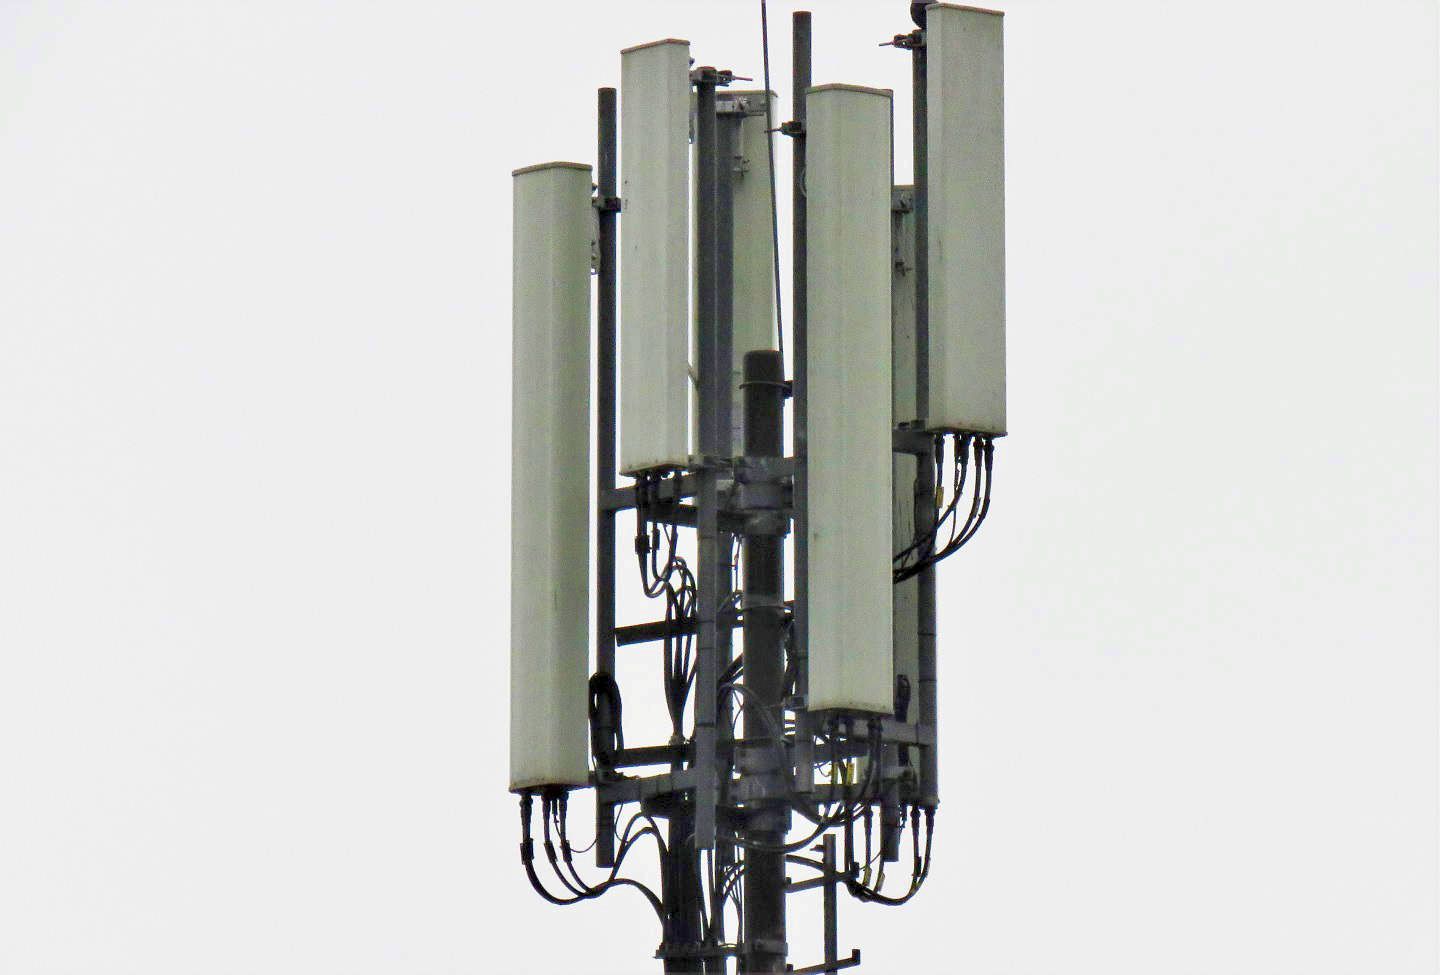 Huawei Antennas used by Orange and T-Mobile